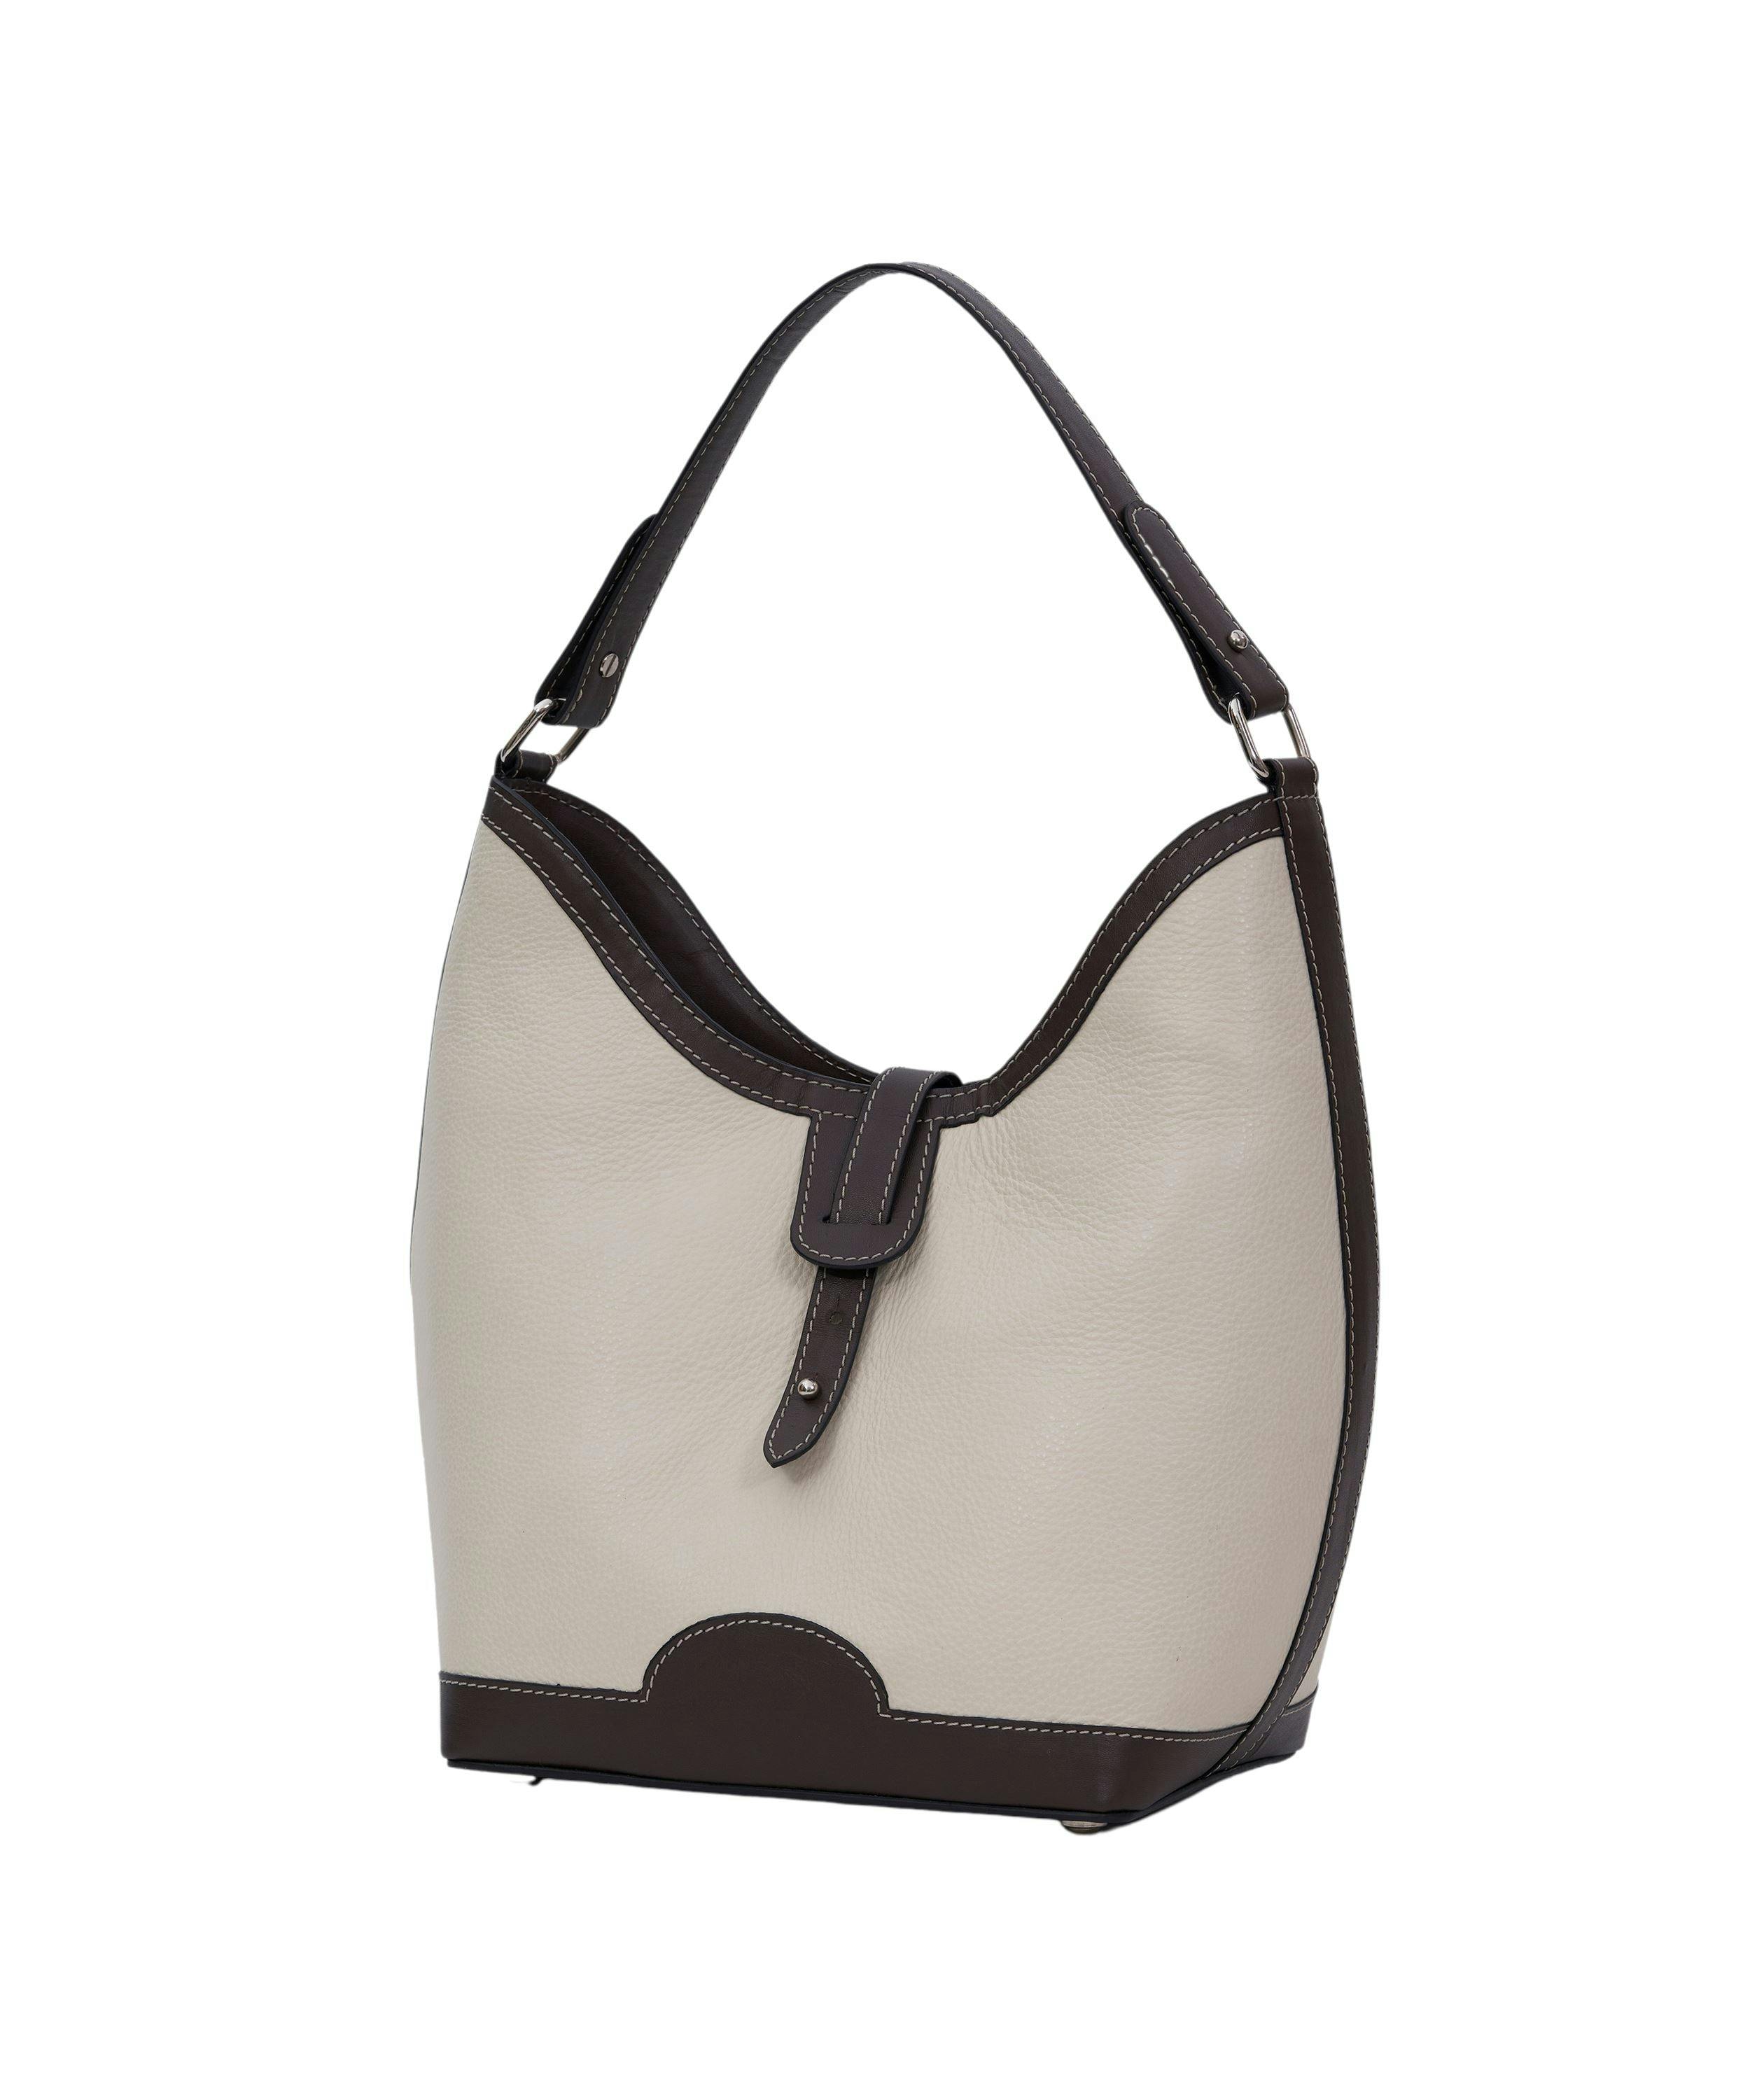 Barrel Top Handle Bag in Cream & Black, a product by Mistry 